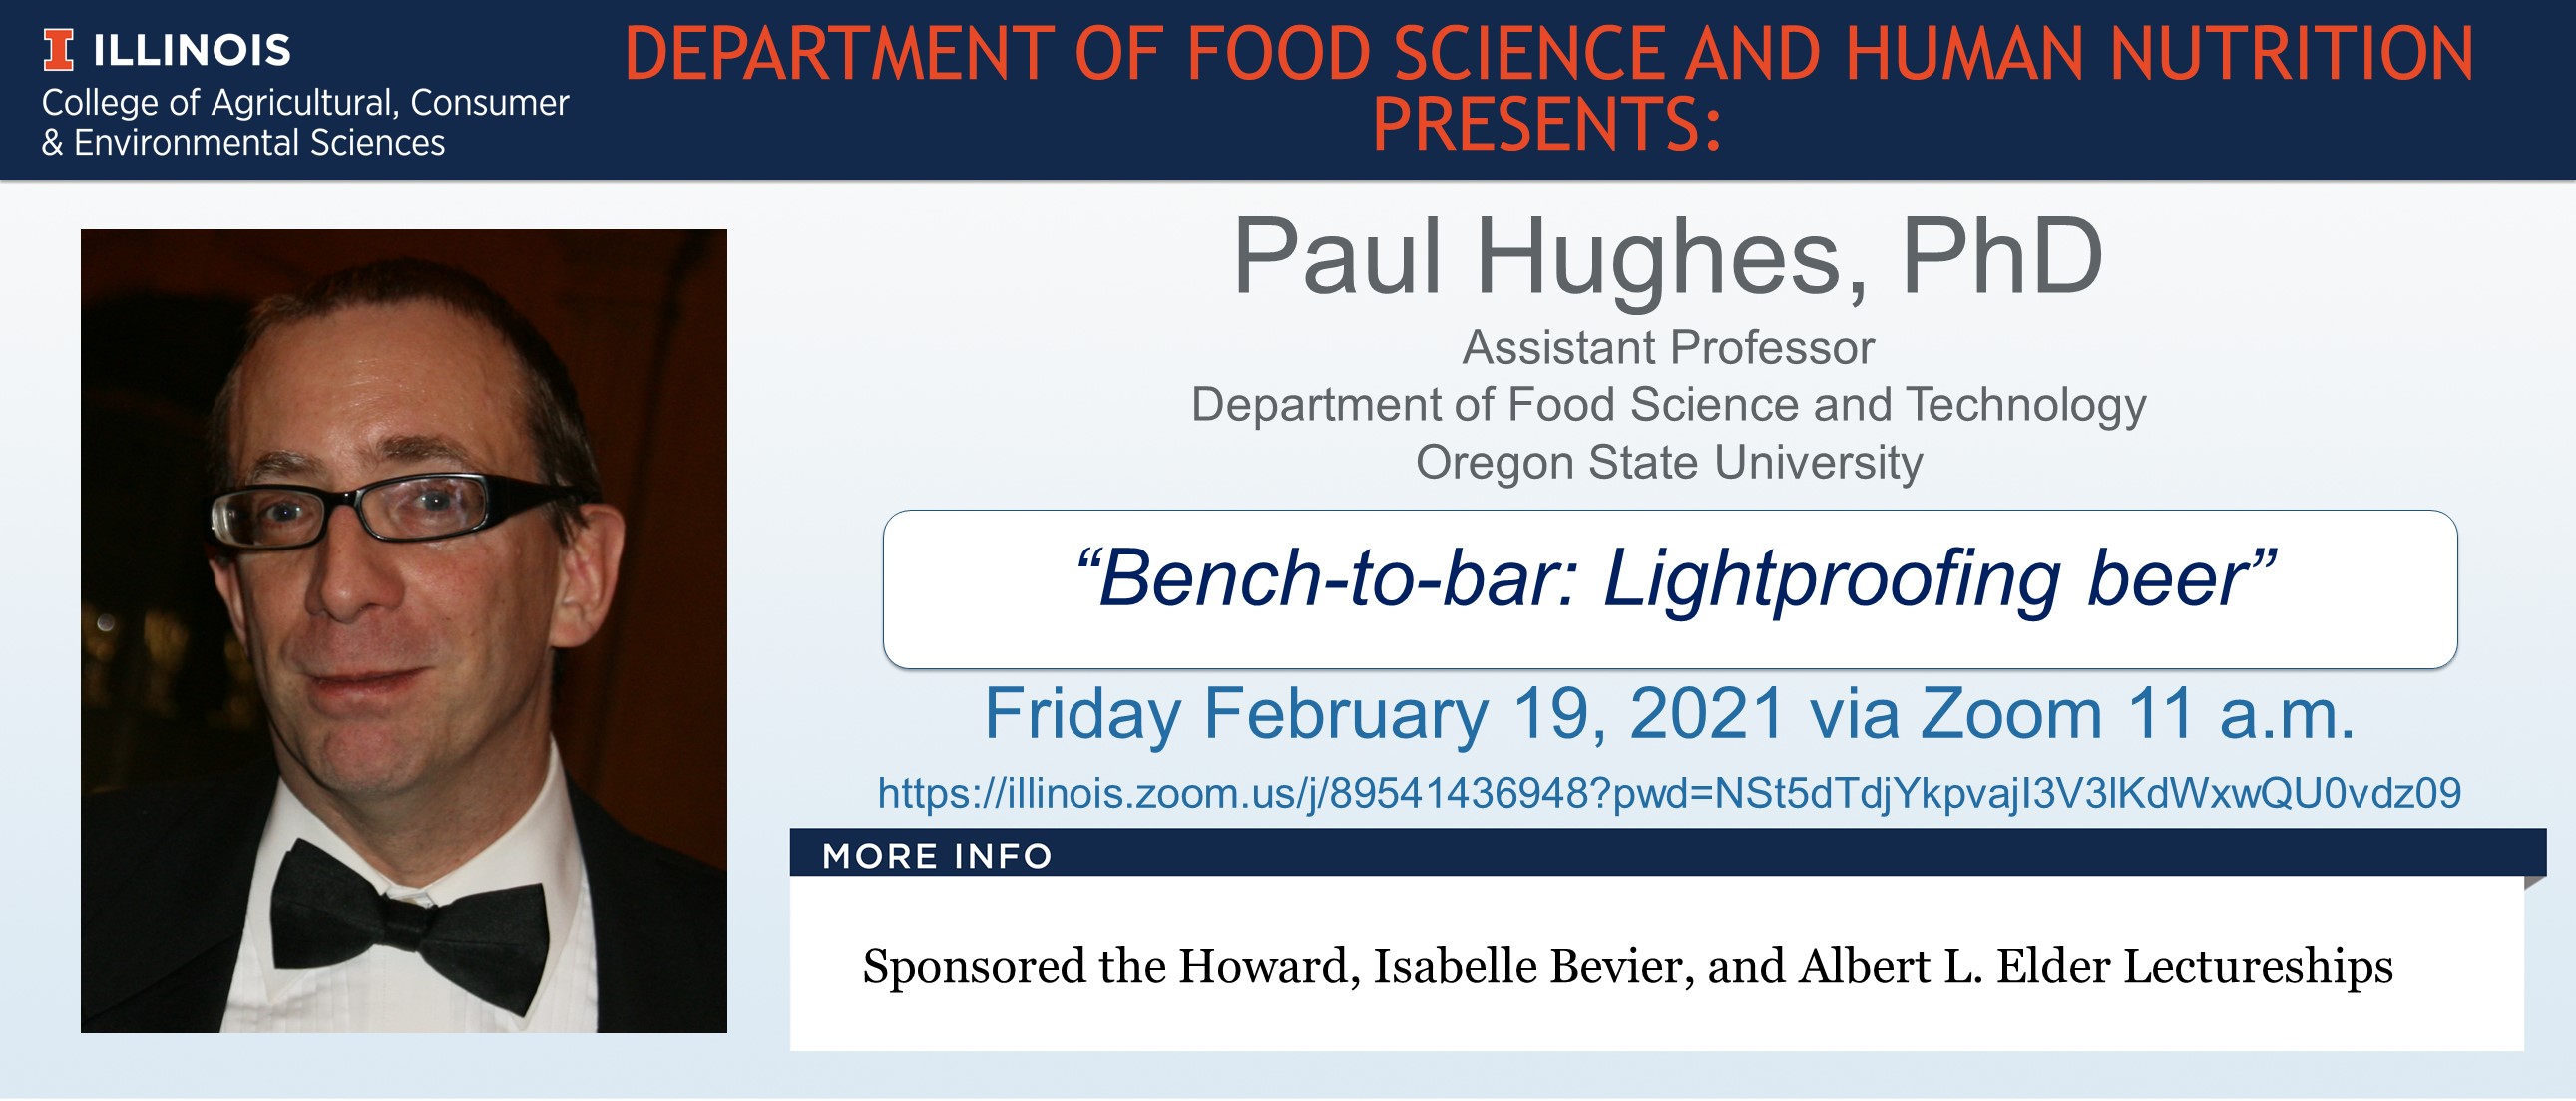 Paul Hughes, PhD Assistant Professor Department of Food Science and Technology annoucement